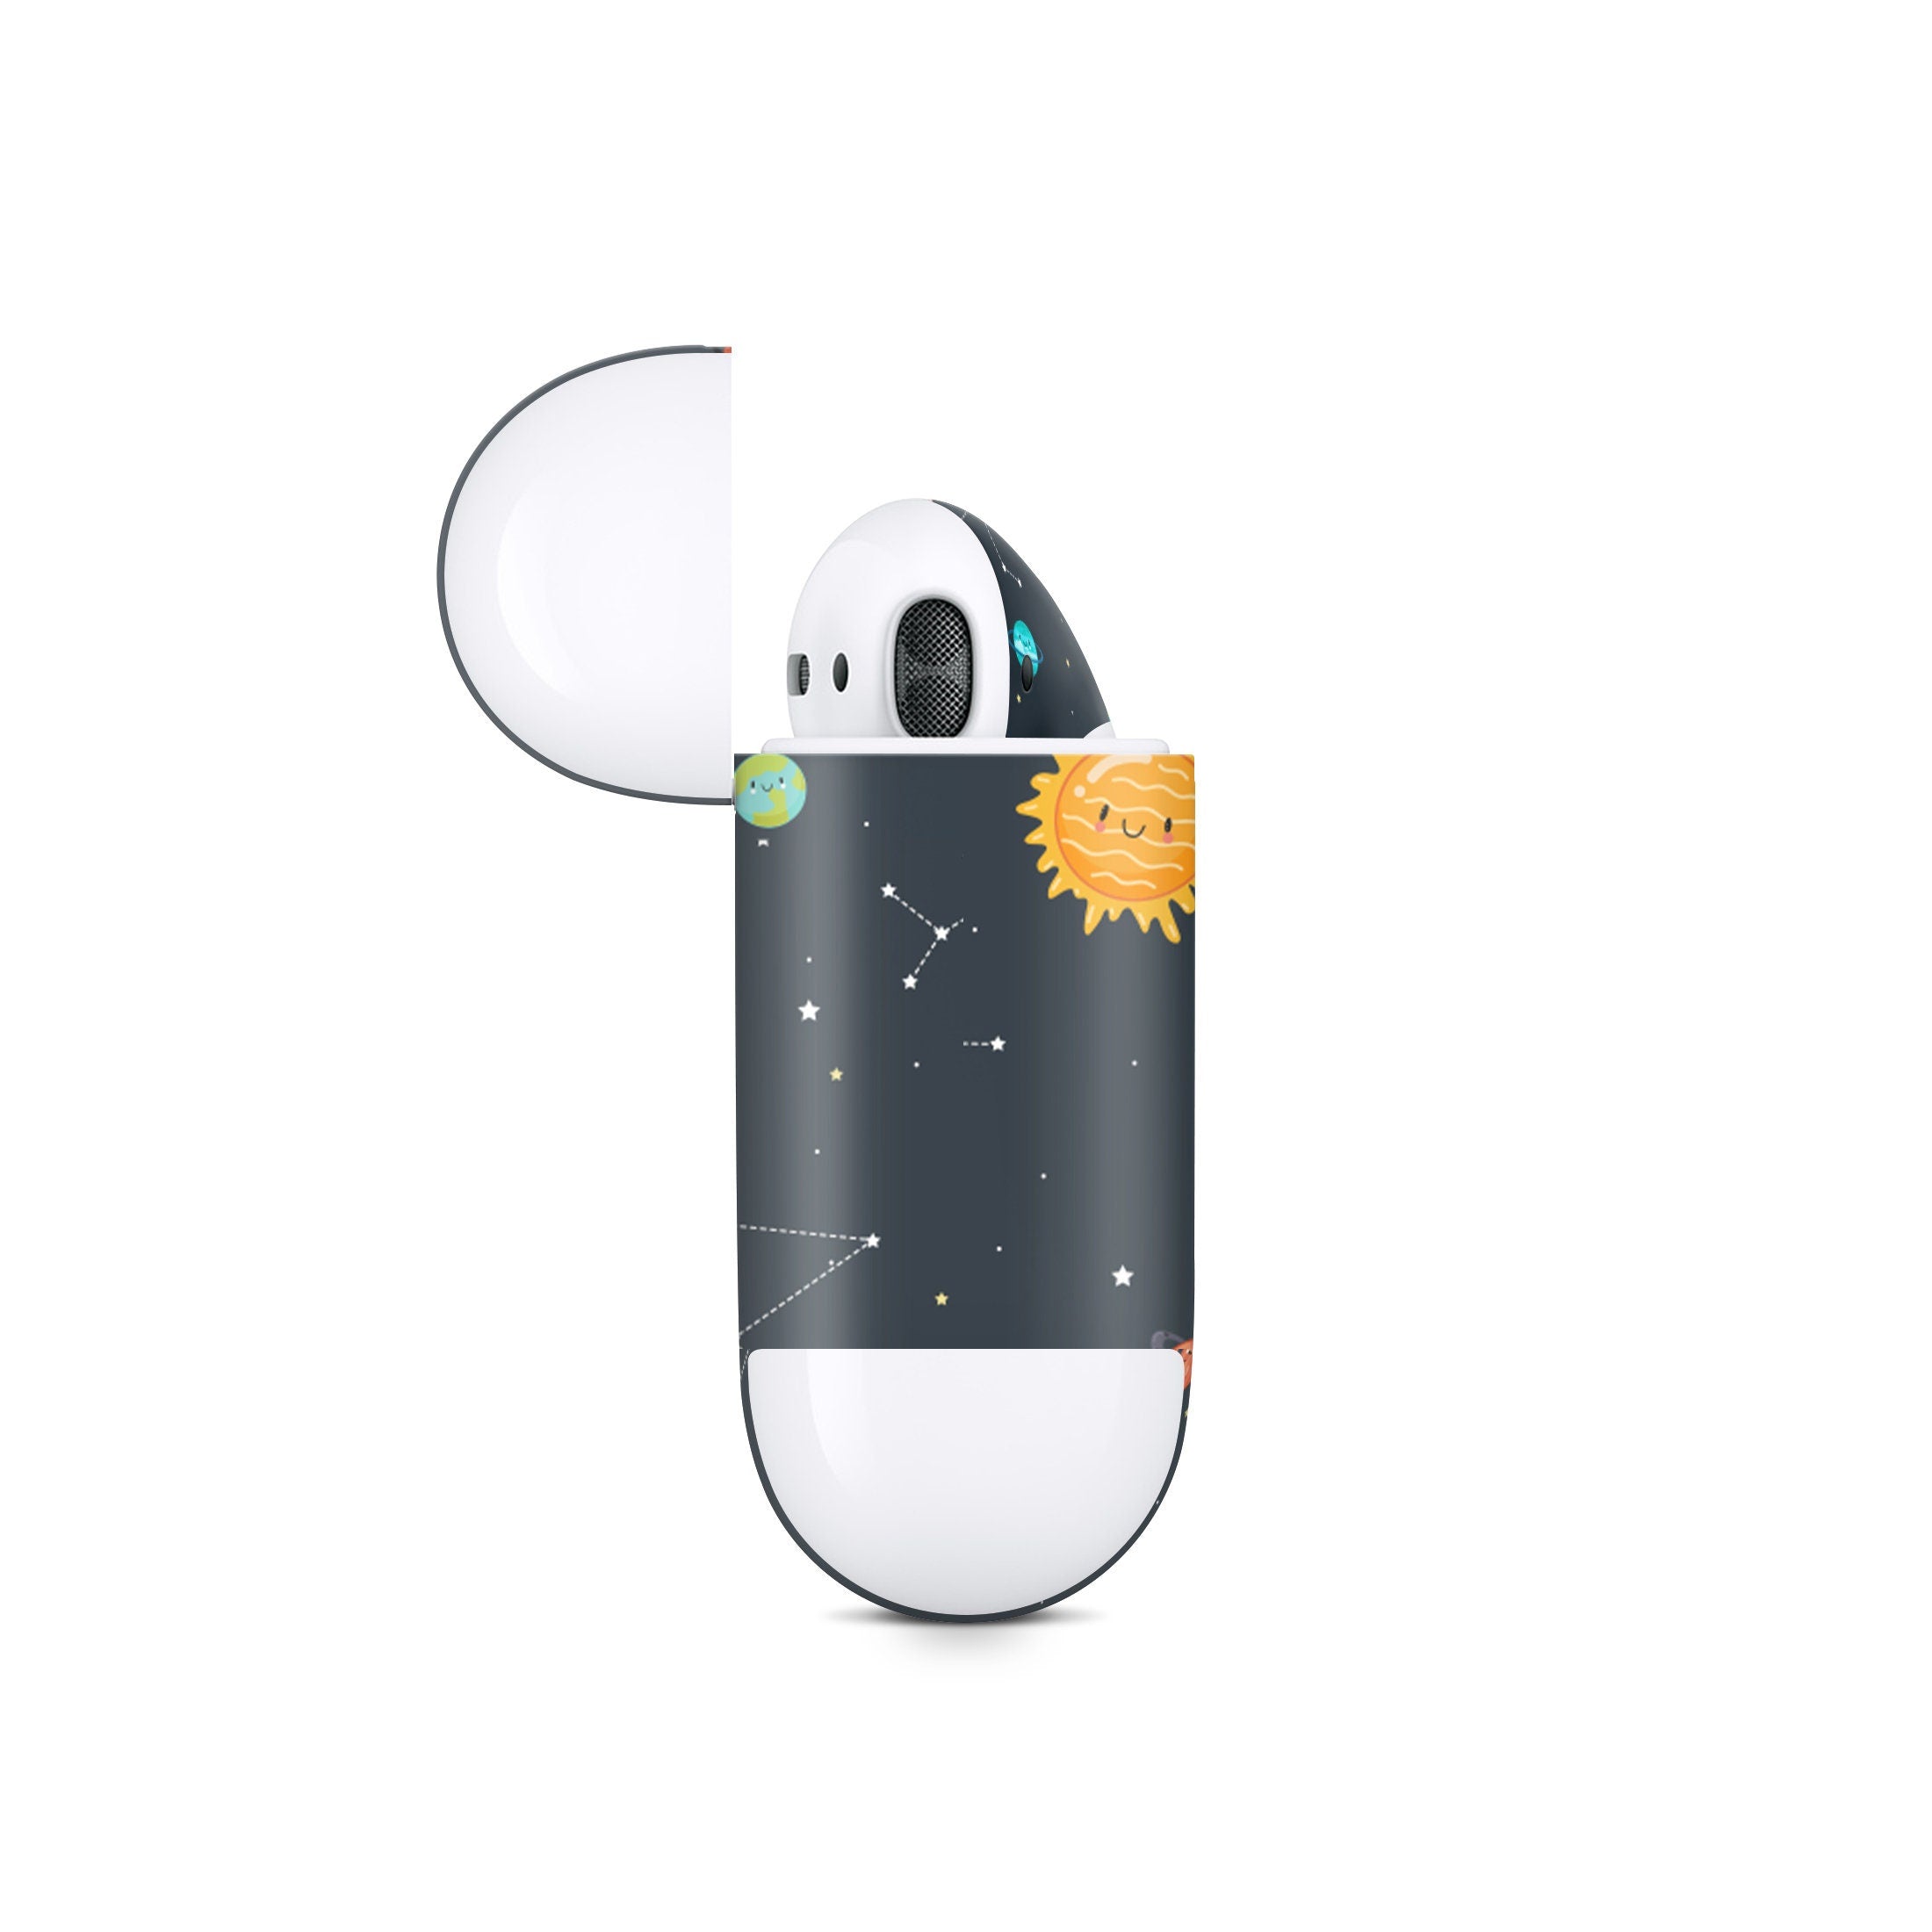 Space Apple Airpod Skins, Galaxy Airpods Sticker for airpods 1 & 2 Vinyl 3m, Airpods skin earbuds, Airpods Protective Full wrap Cover